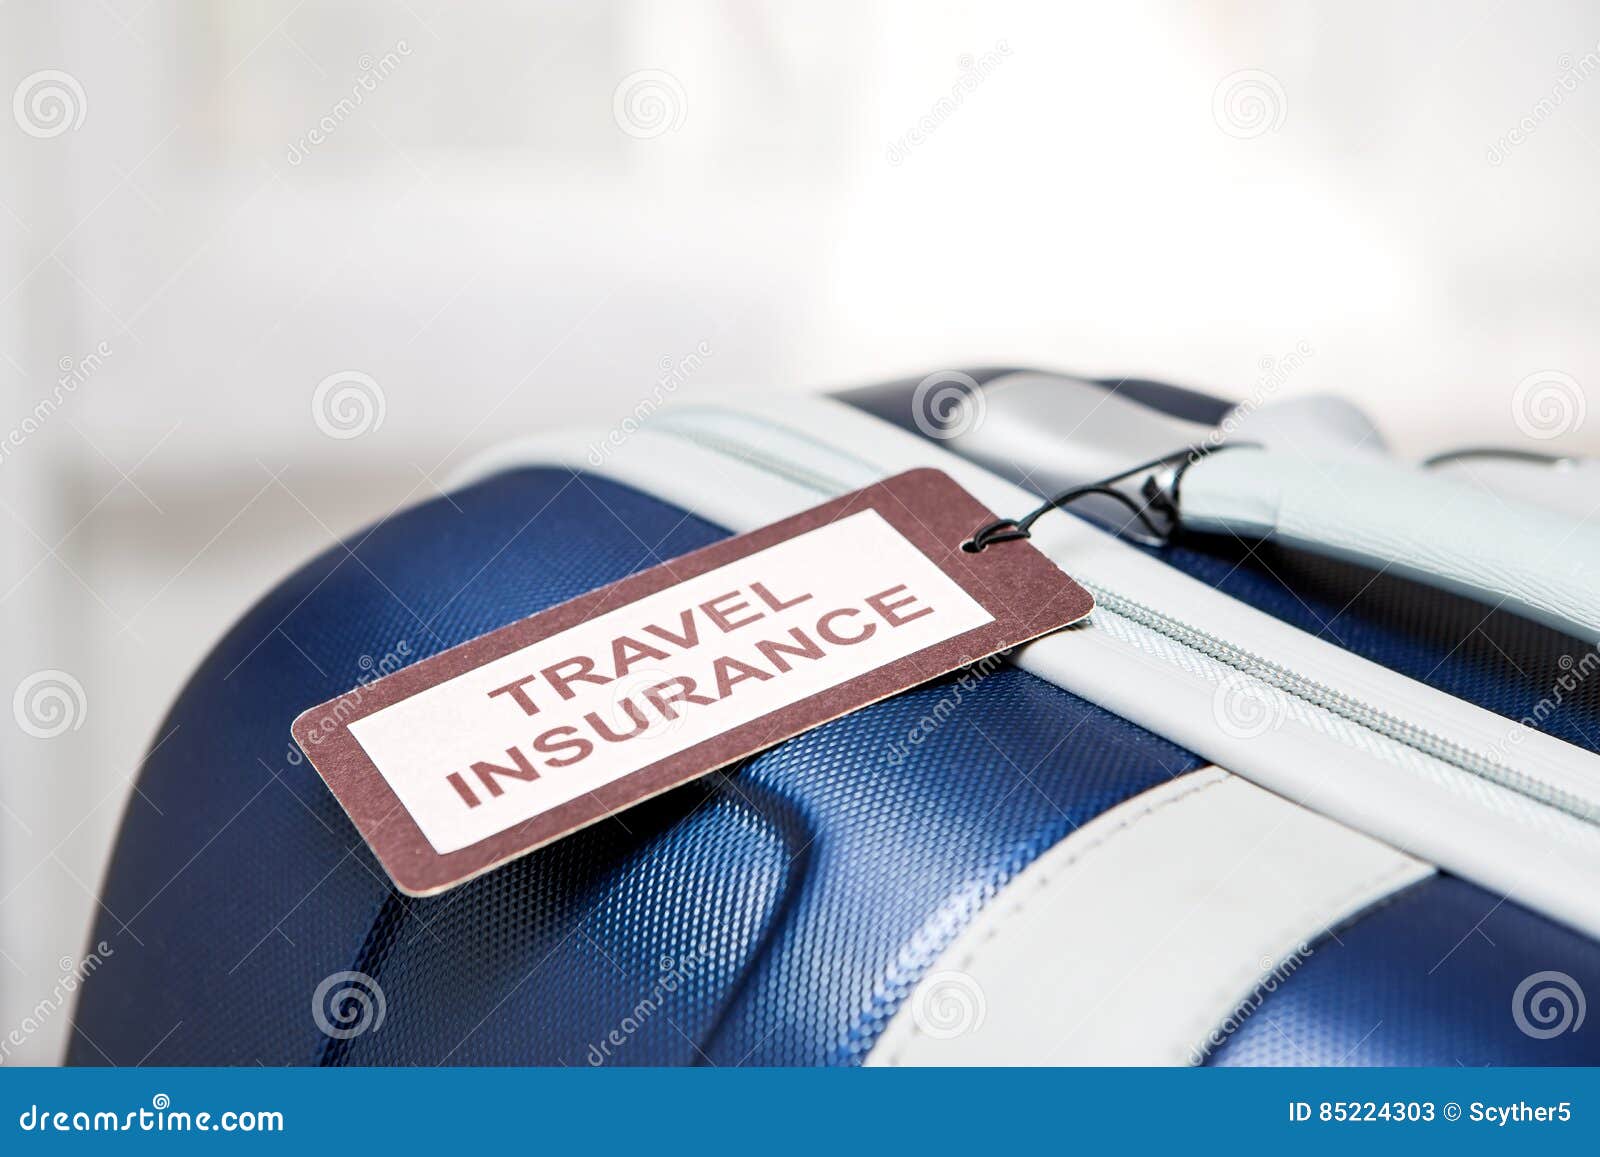 Lost luggage? 5 tips before filing an insurance claim | PropertyCasualty360